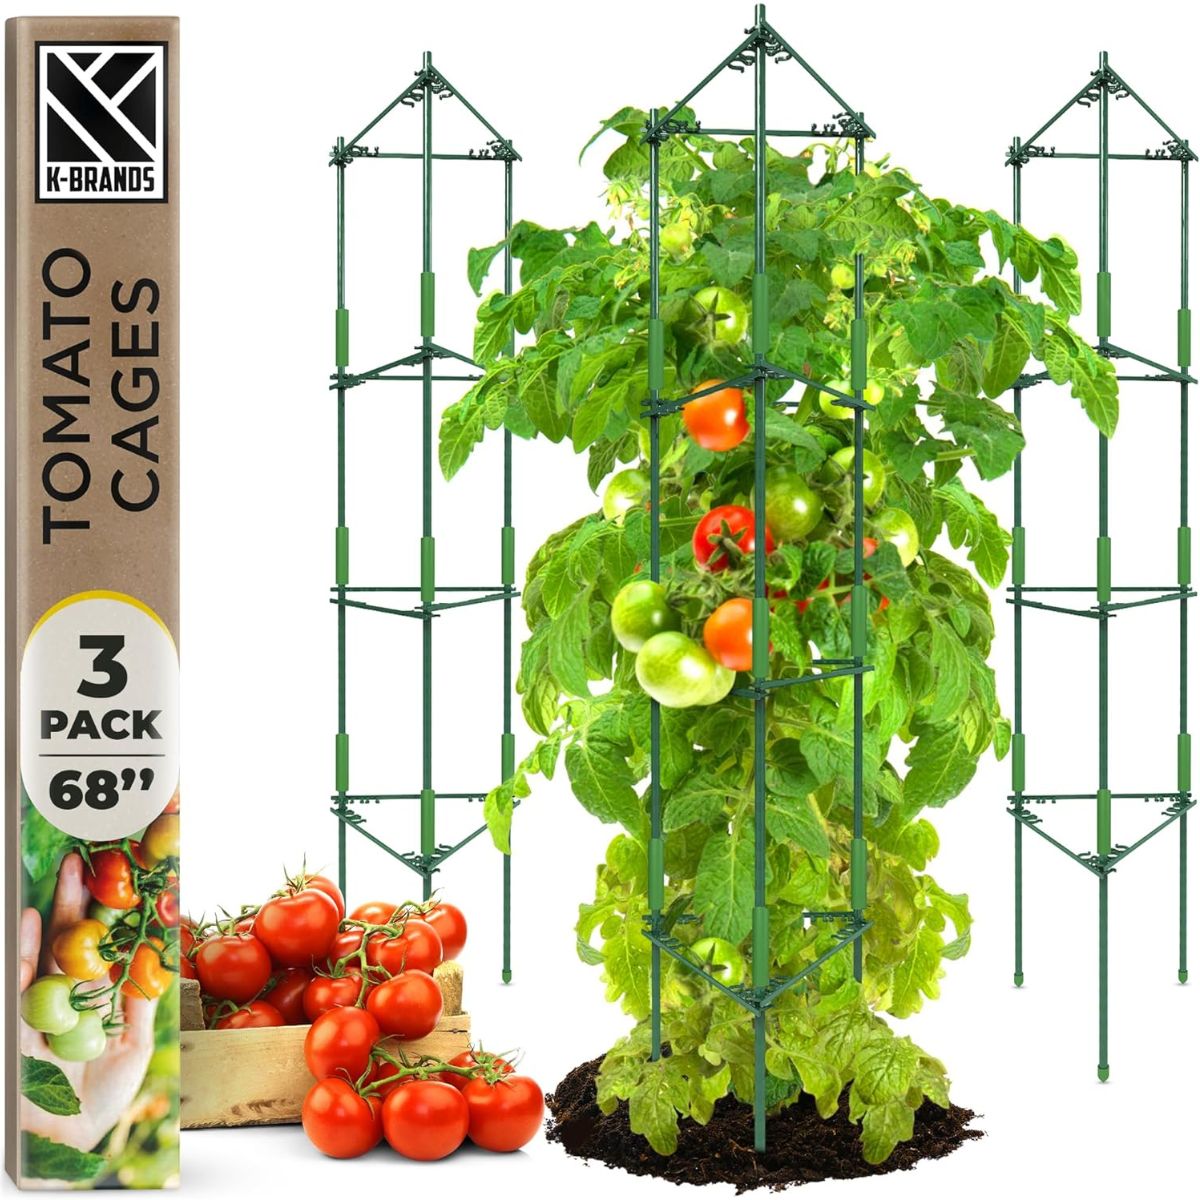 K-Brands Extra Tall Tomato Cages with a leafy tomato plant growing